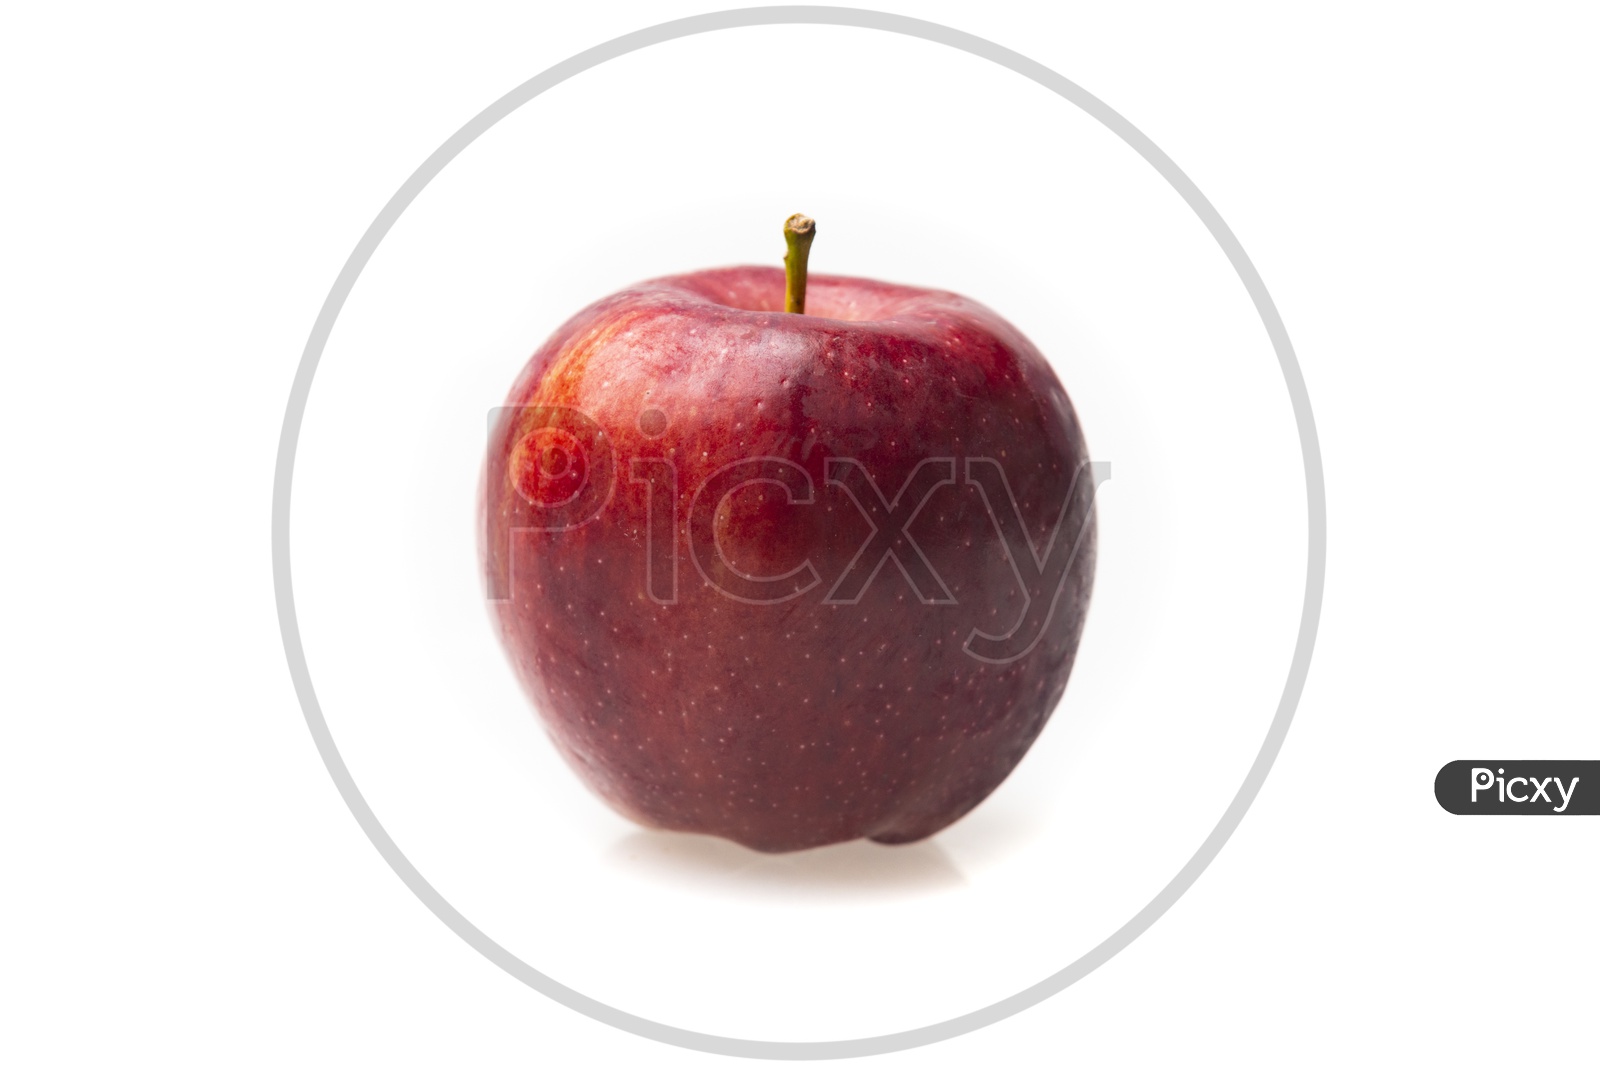 Red Apple Isolated on White Background